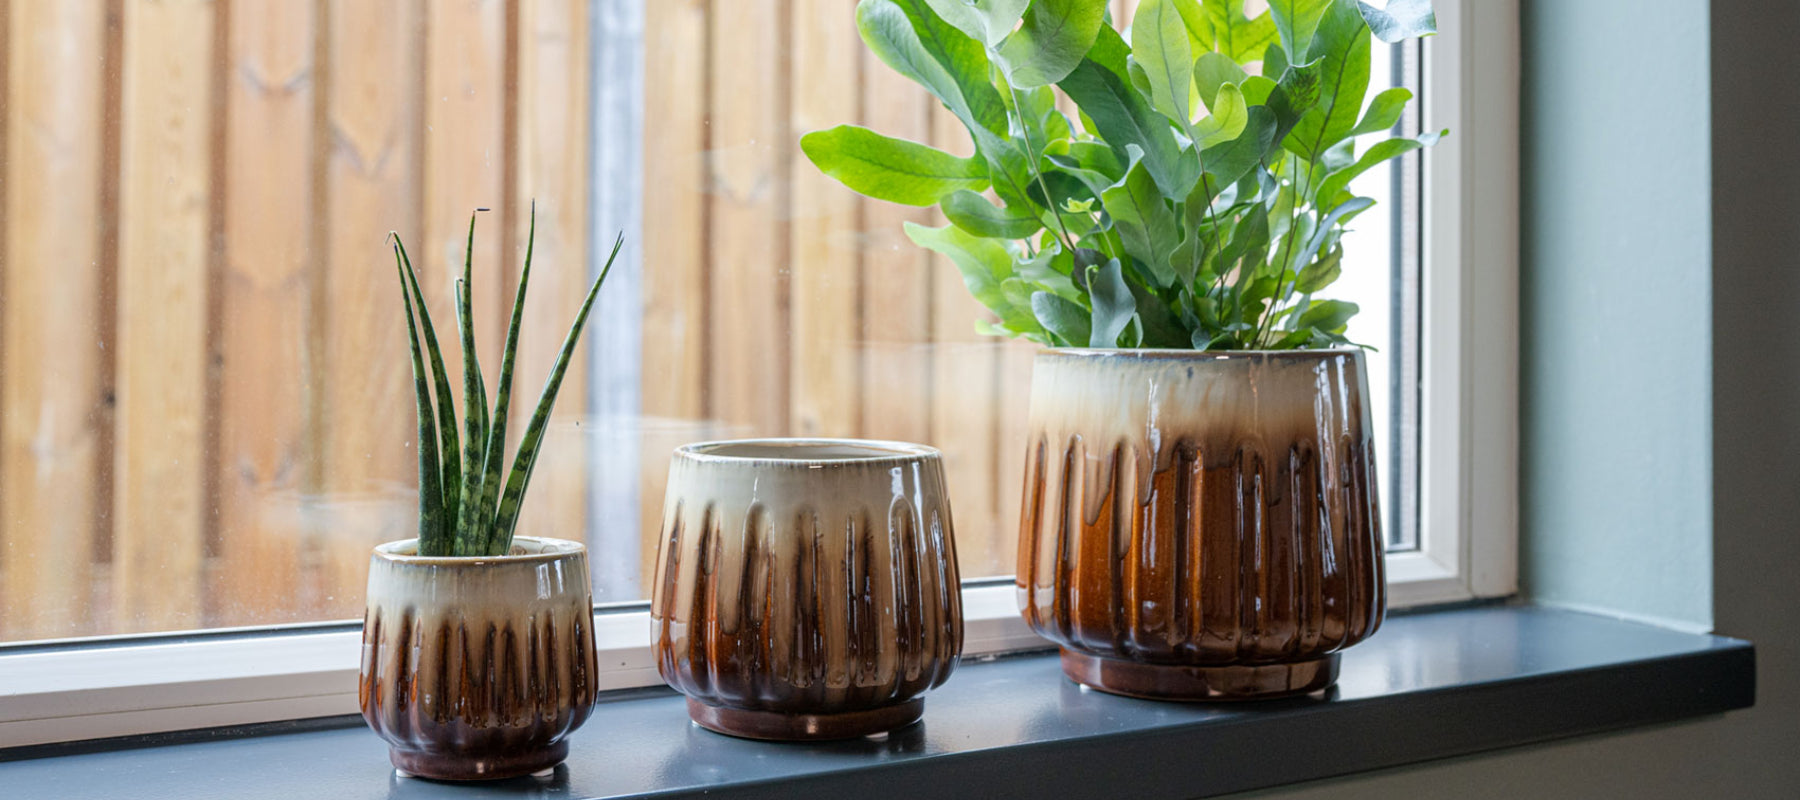 STYLING / 6 Ways To Refresh Your Home With Plants This Autumn